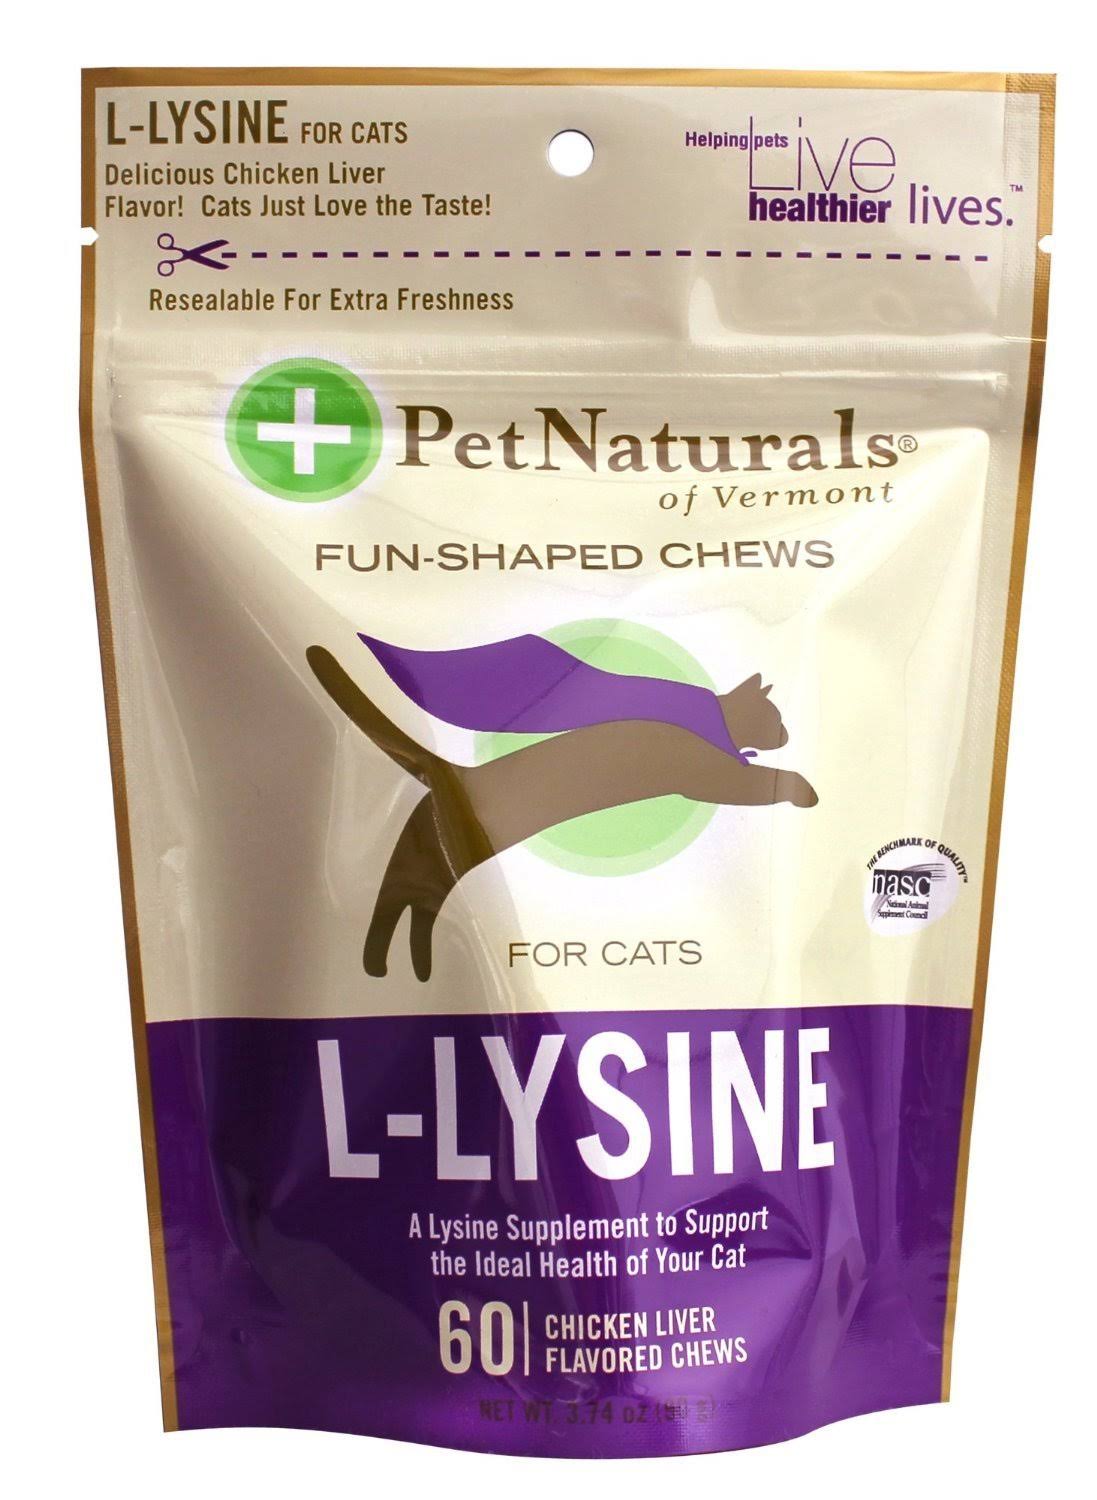 Pet Naturals of Vermont L-Lysine for Cats - Chicken Liver, 60 Fun-Shaped Chews